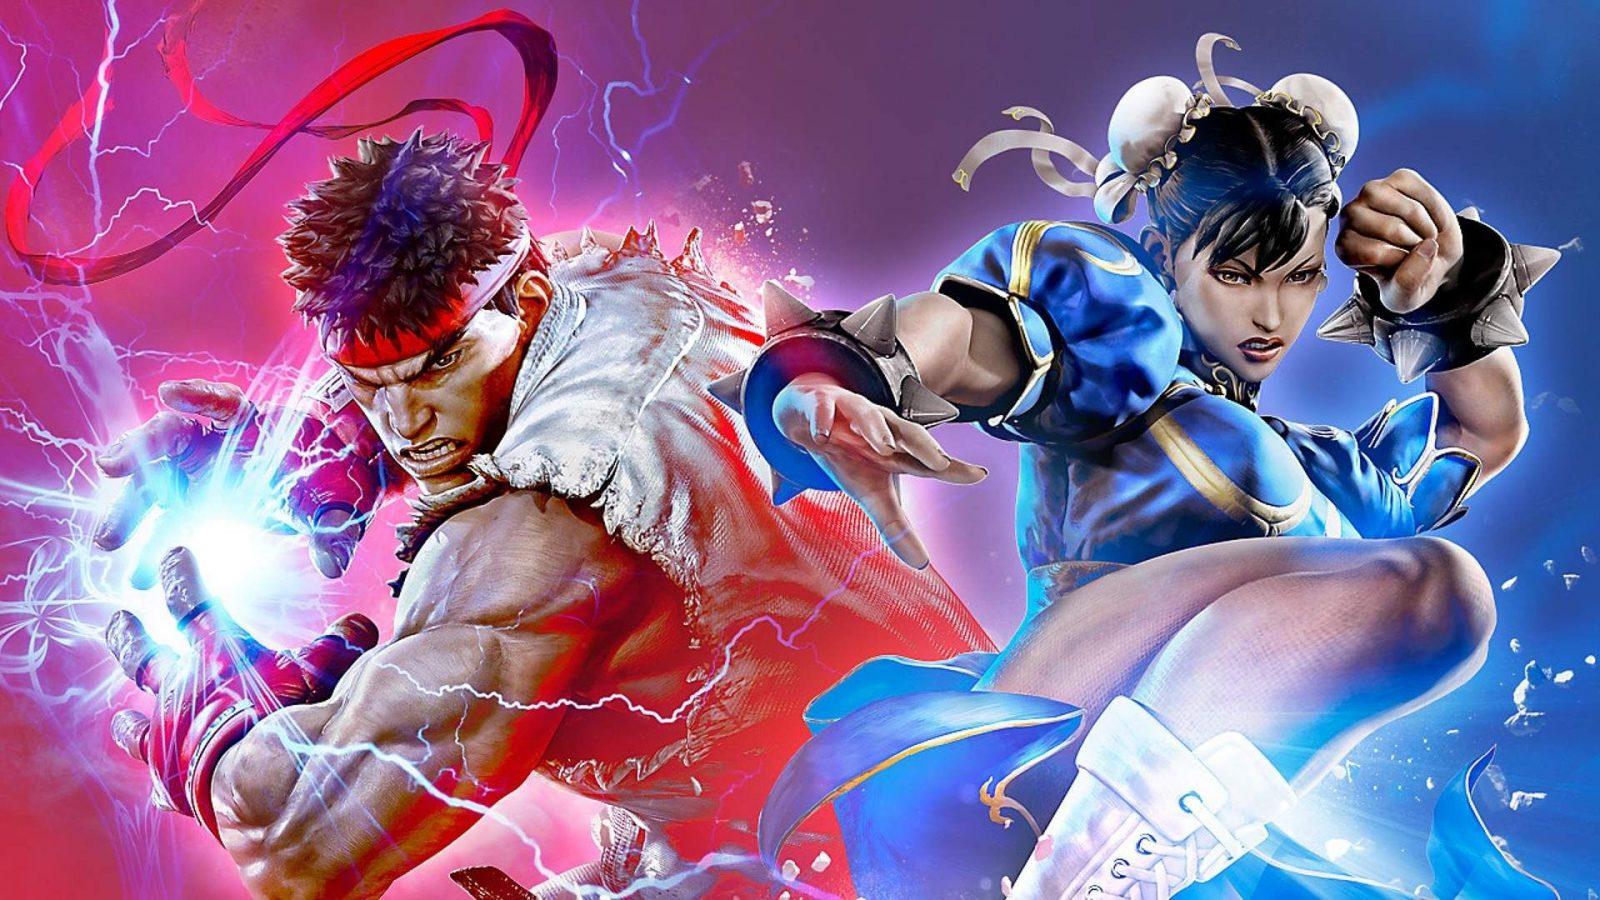 Street Fighter 6 PC Requirements: Minimum & recommended specs - Dexerto